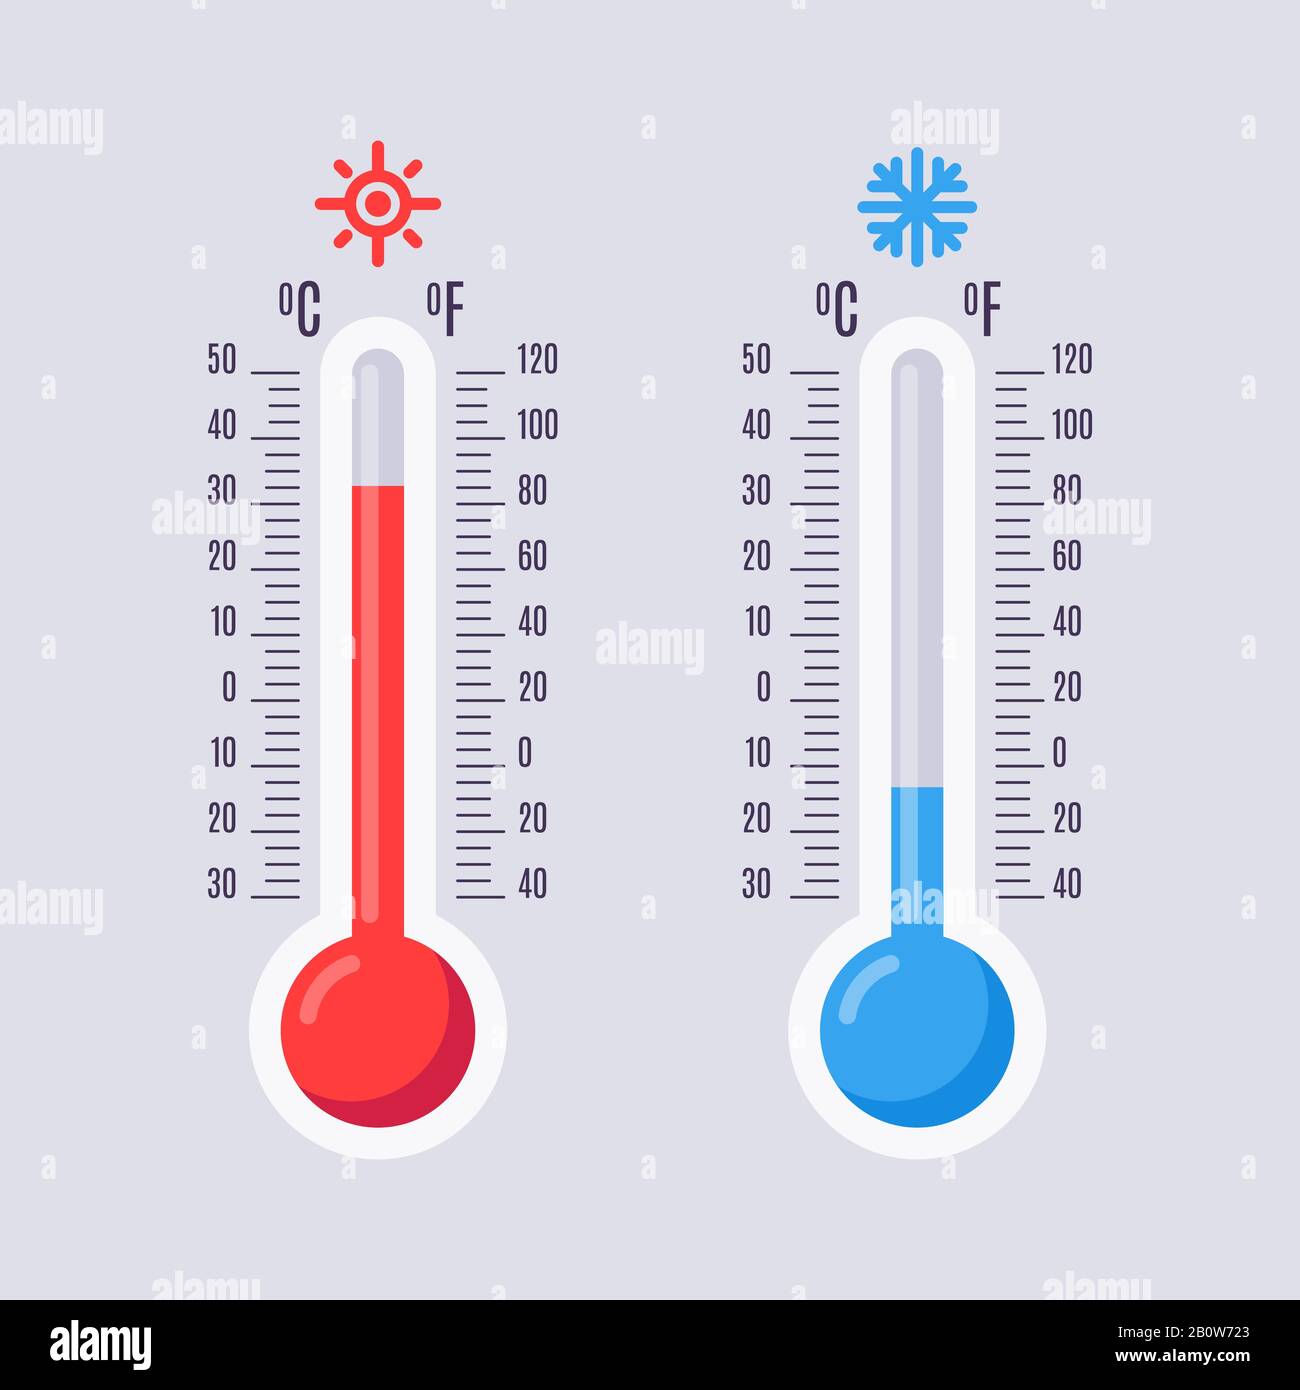 https://c8.alamy.com/comp/2B0W723/flat-thermometers-hot-and-cold-mercury-thermometer-with-fahrenheit-and-celsius-scales-warm-and-cool-temperature-vector-icons-2B0W723.jpg